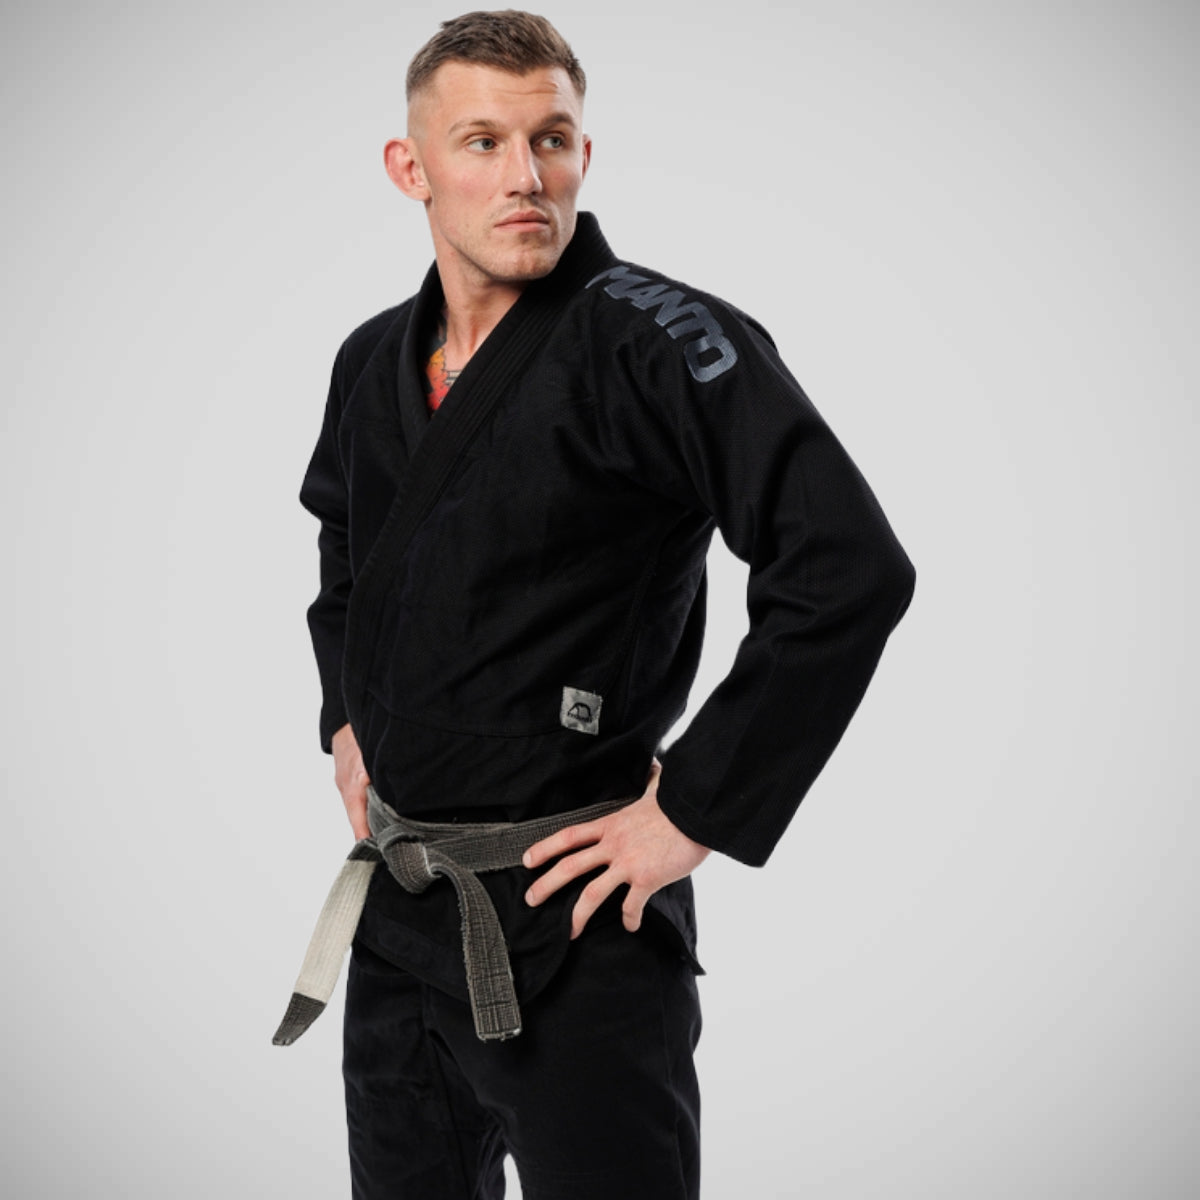 Mens BJJ Gi from Made4Fighters